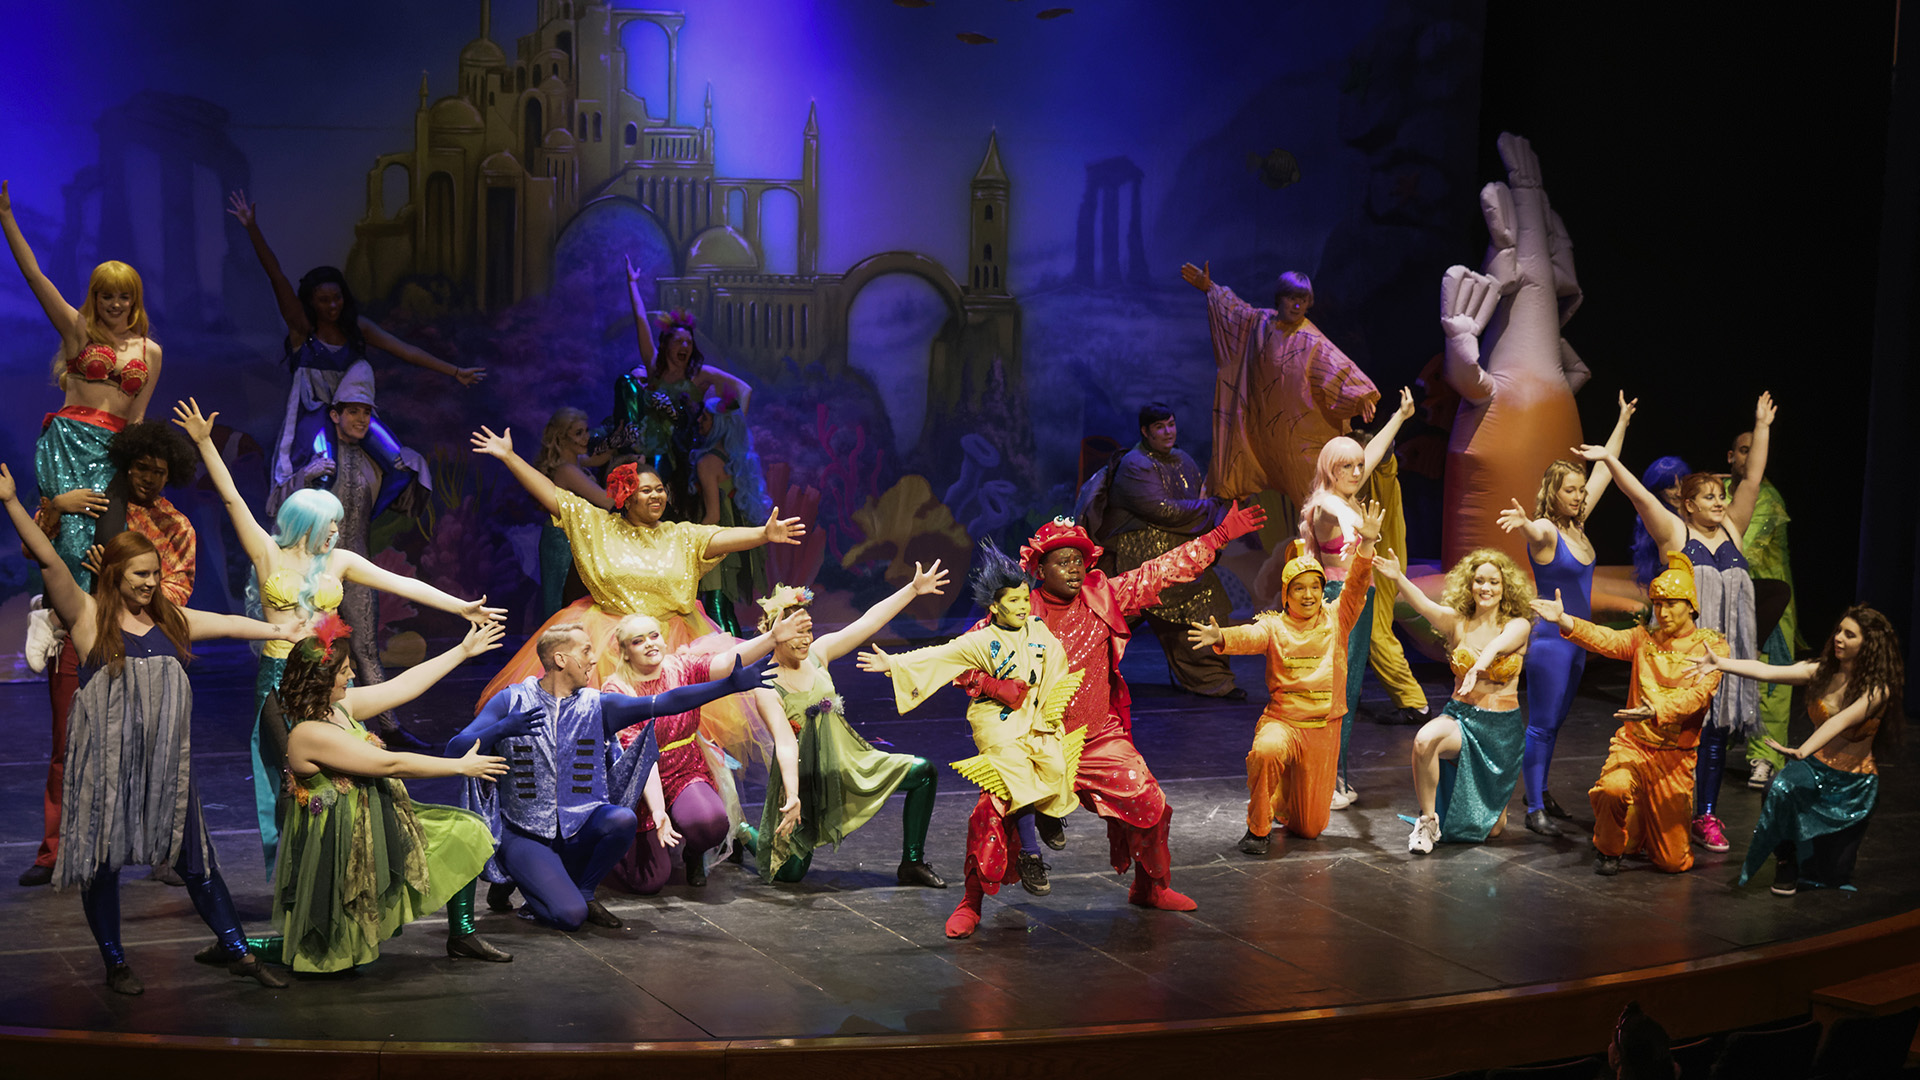 Theater performance of the Little Mermaid